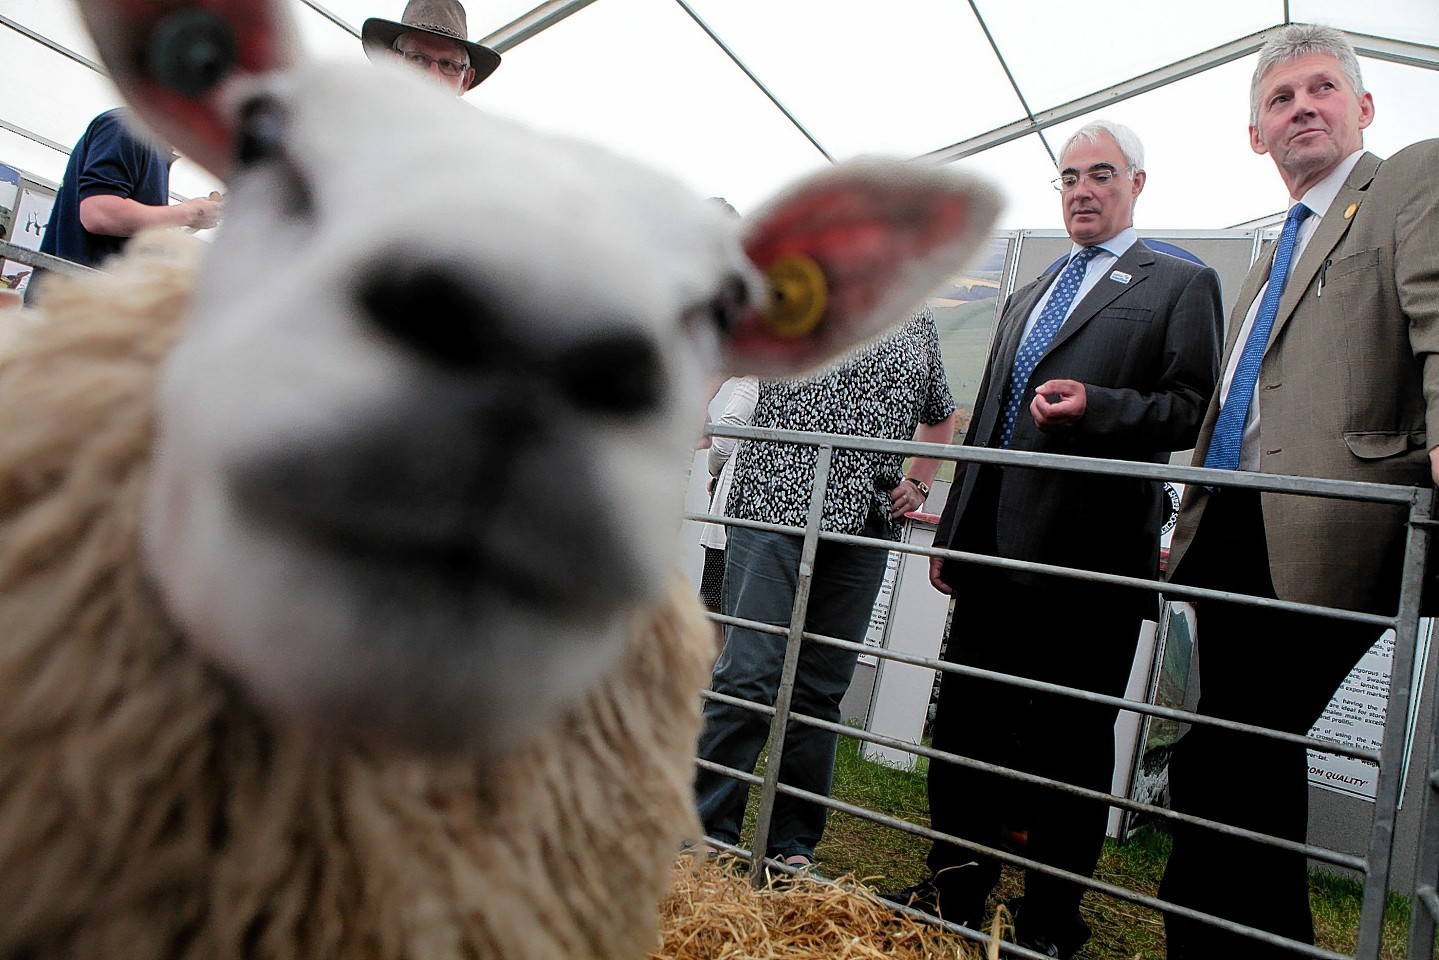 Better Together leader Alistair Darling takes a tour round the Royal Highland Show and speaks to farmers to make the case that being part of the UK secures the best future for Scotland's rural communities